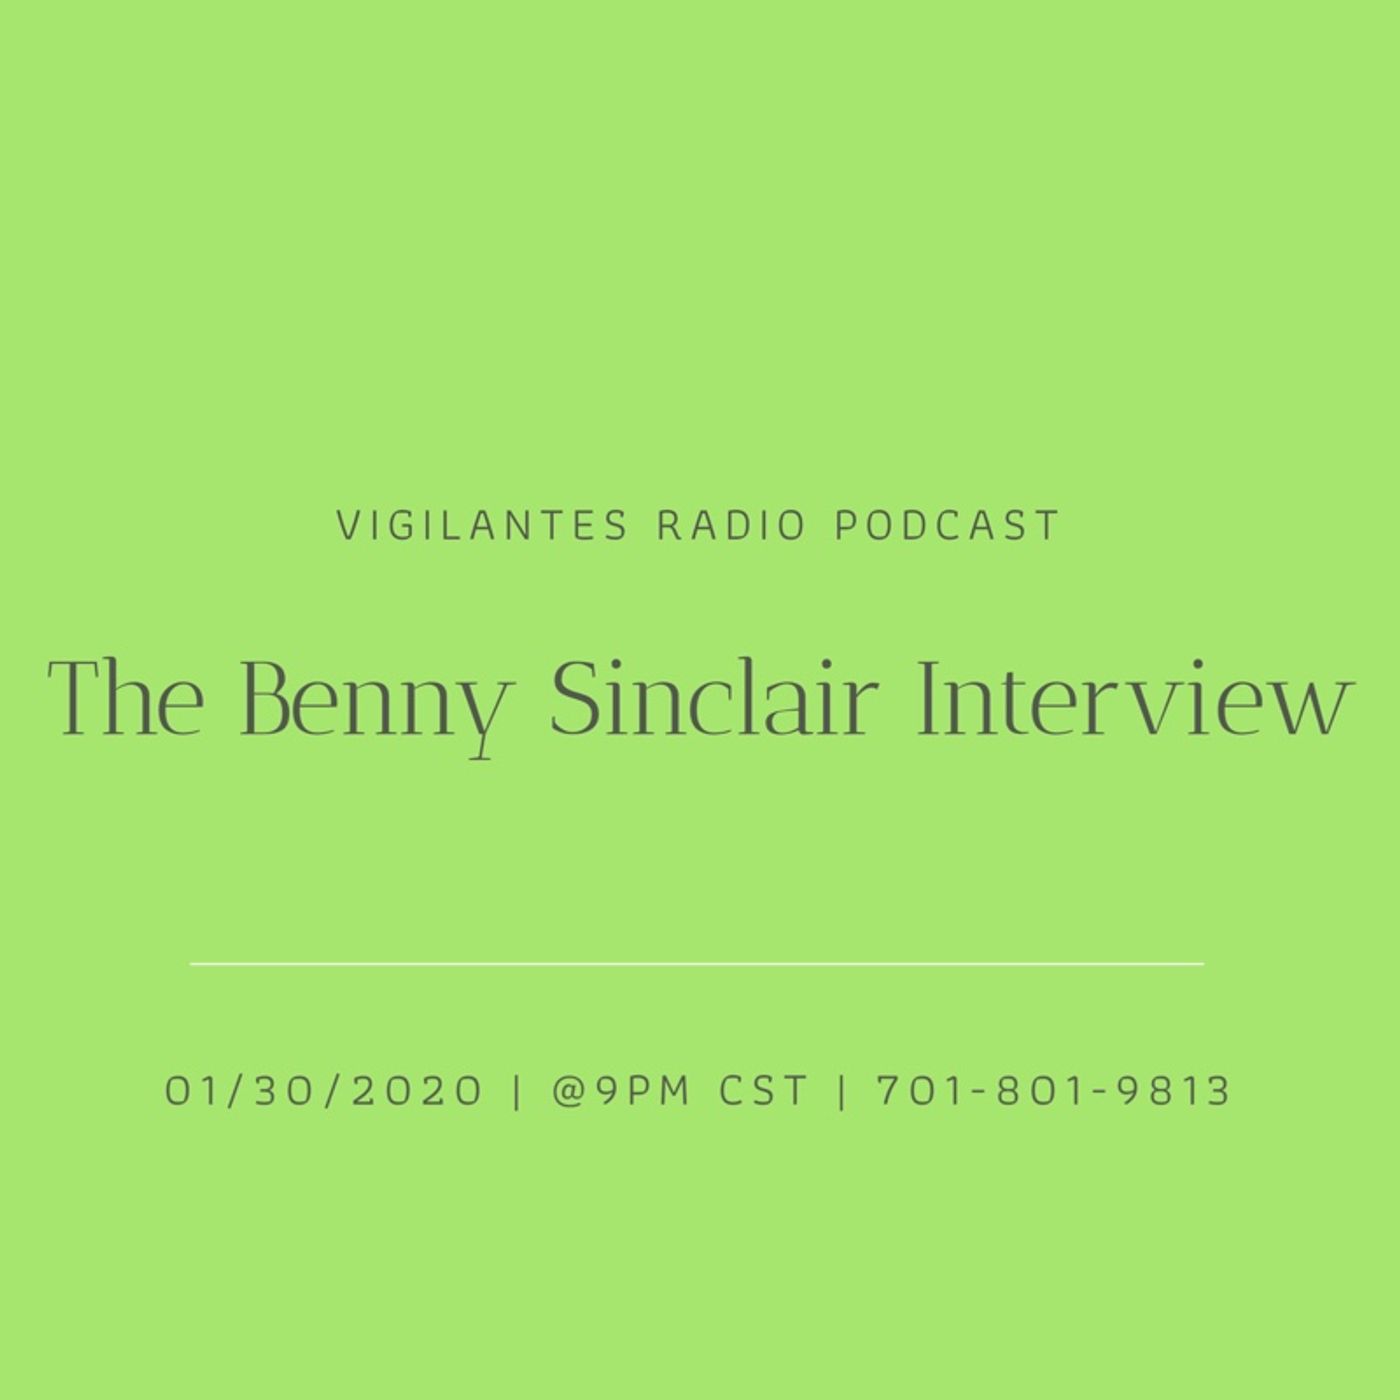 The Benny Sinclair Interview. Image